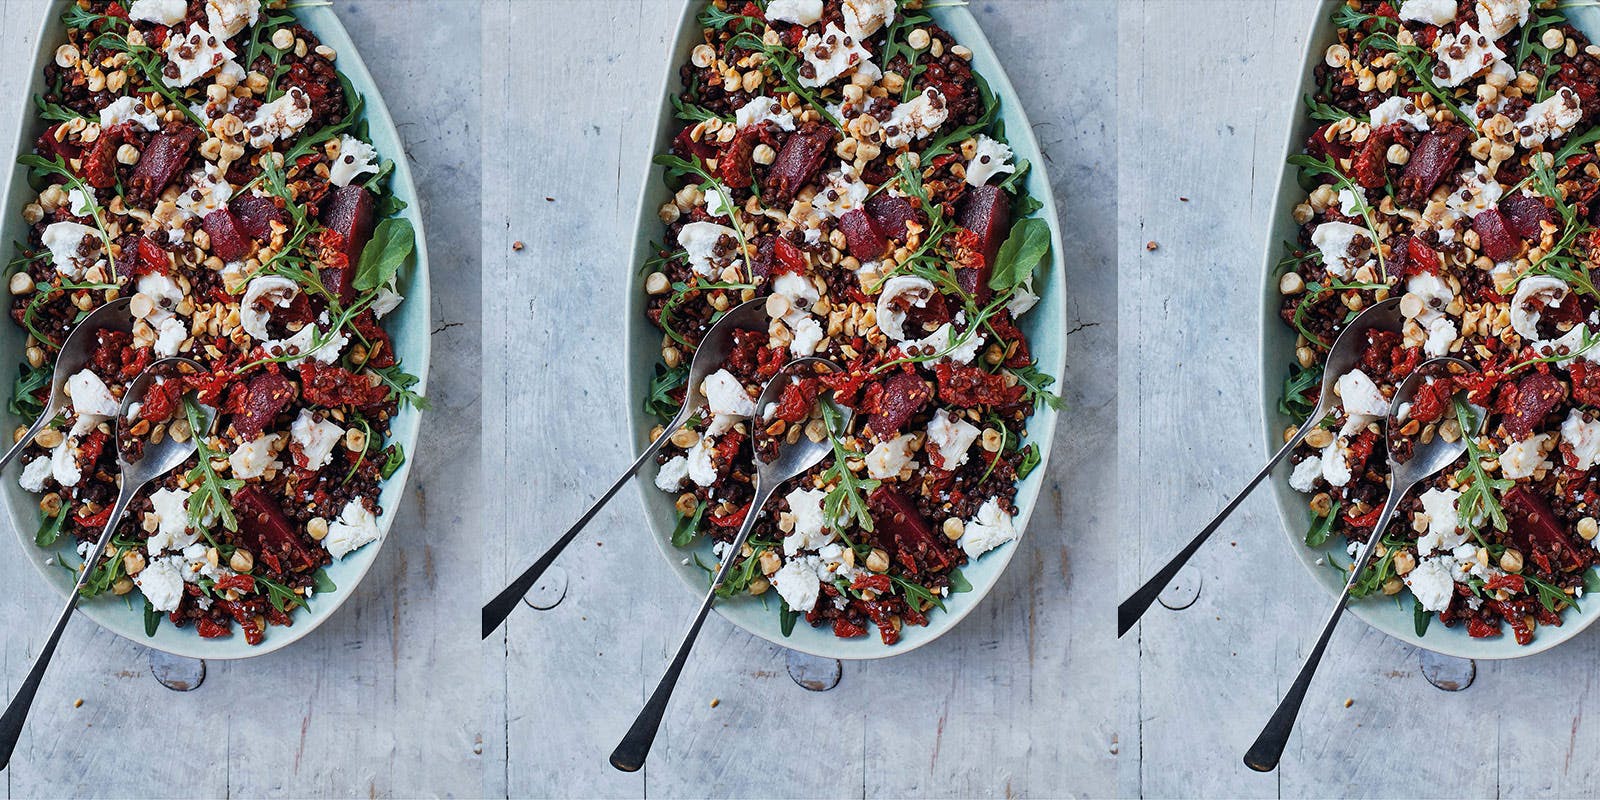 Beetroot, lentil and goat’s cheese salad